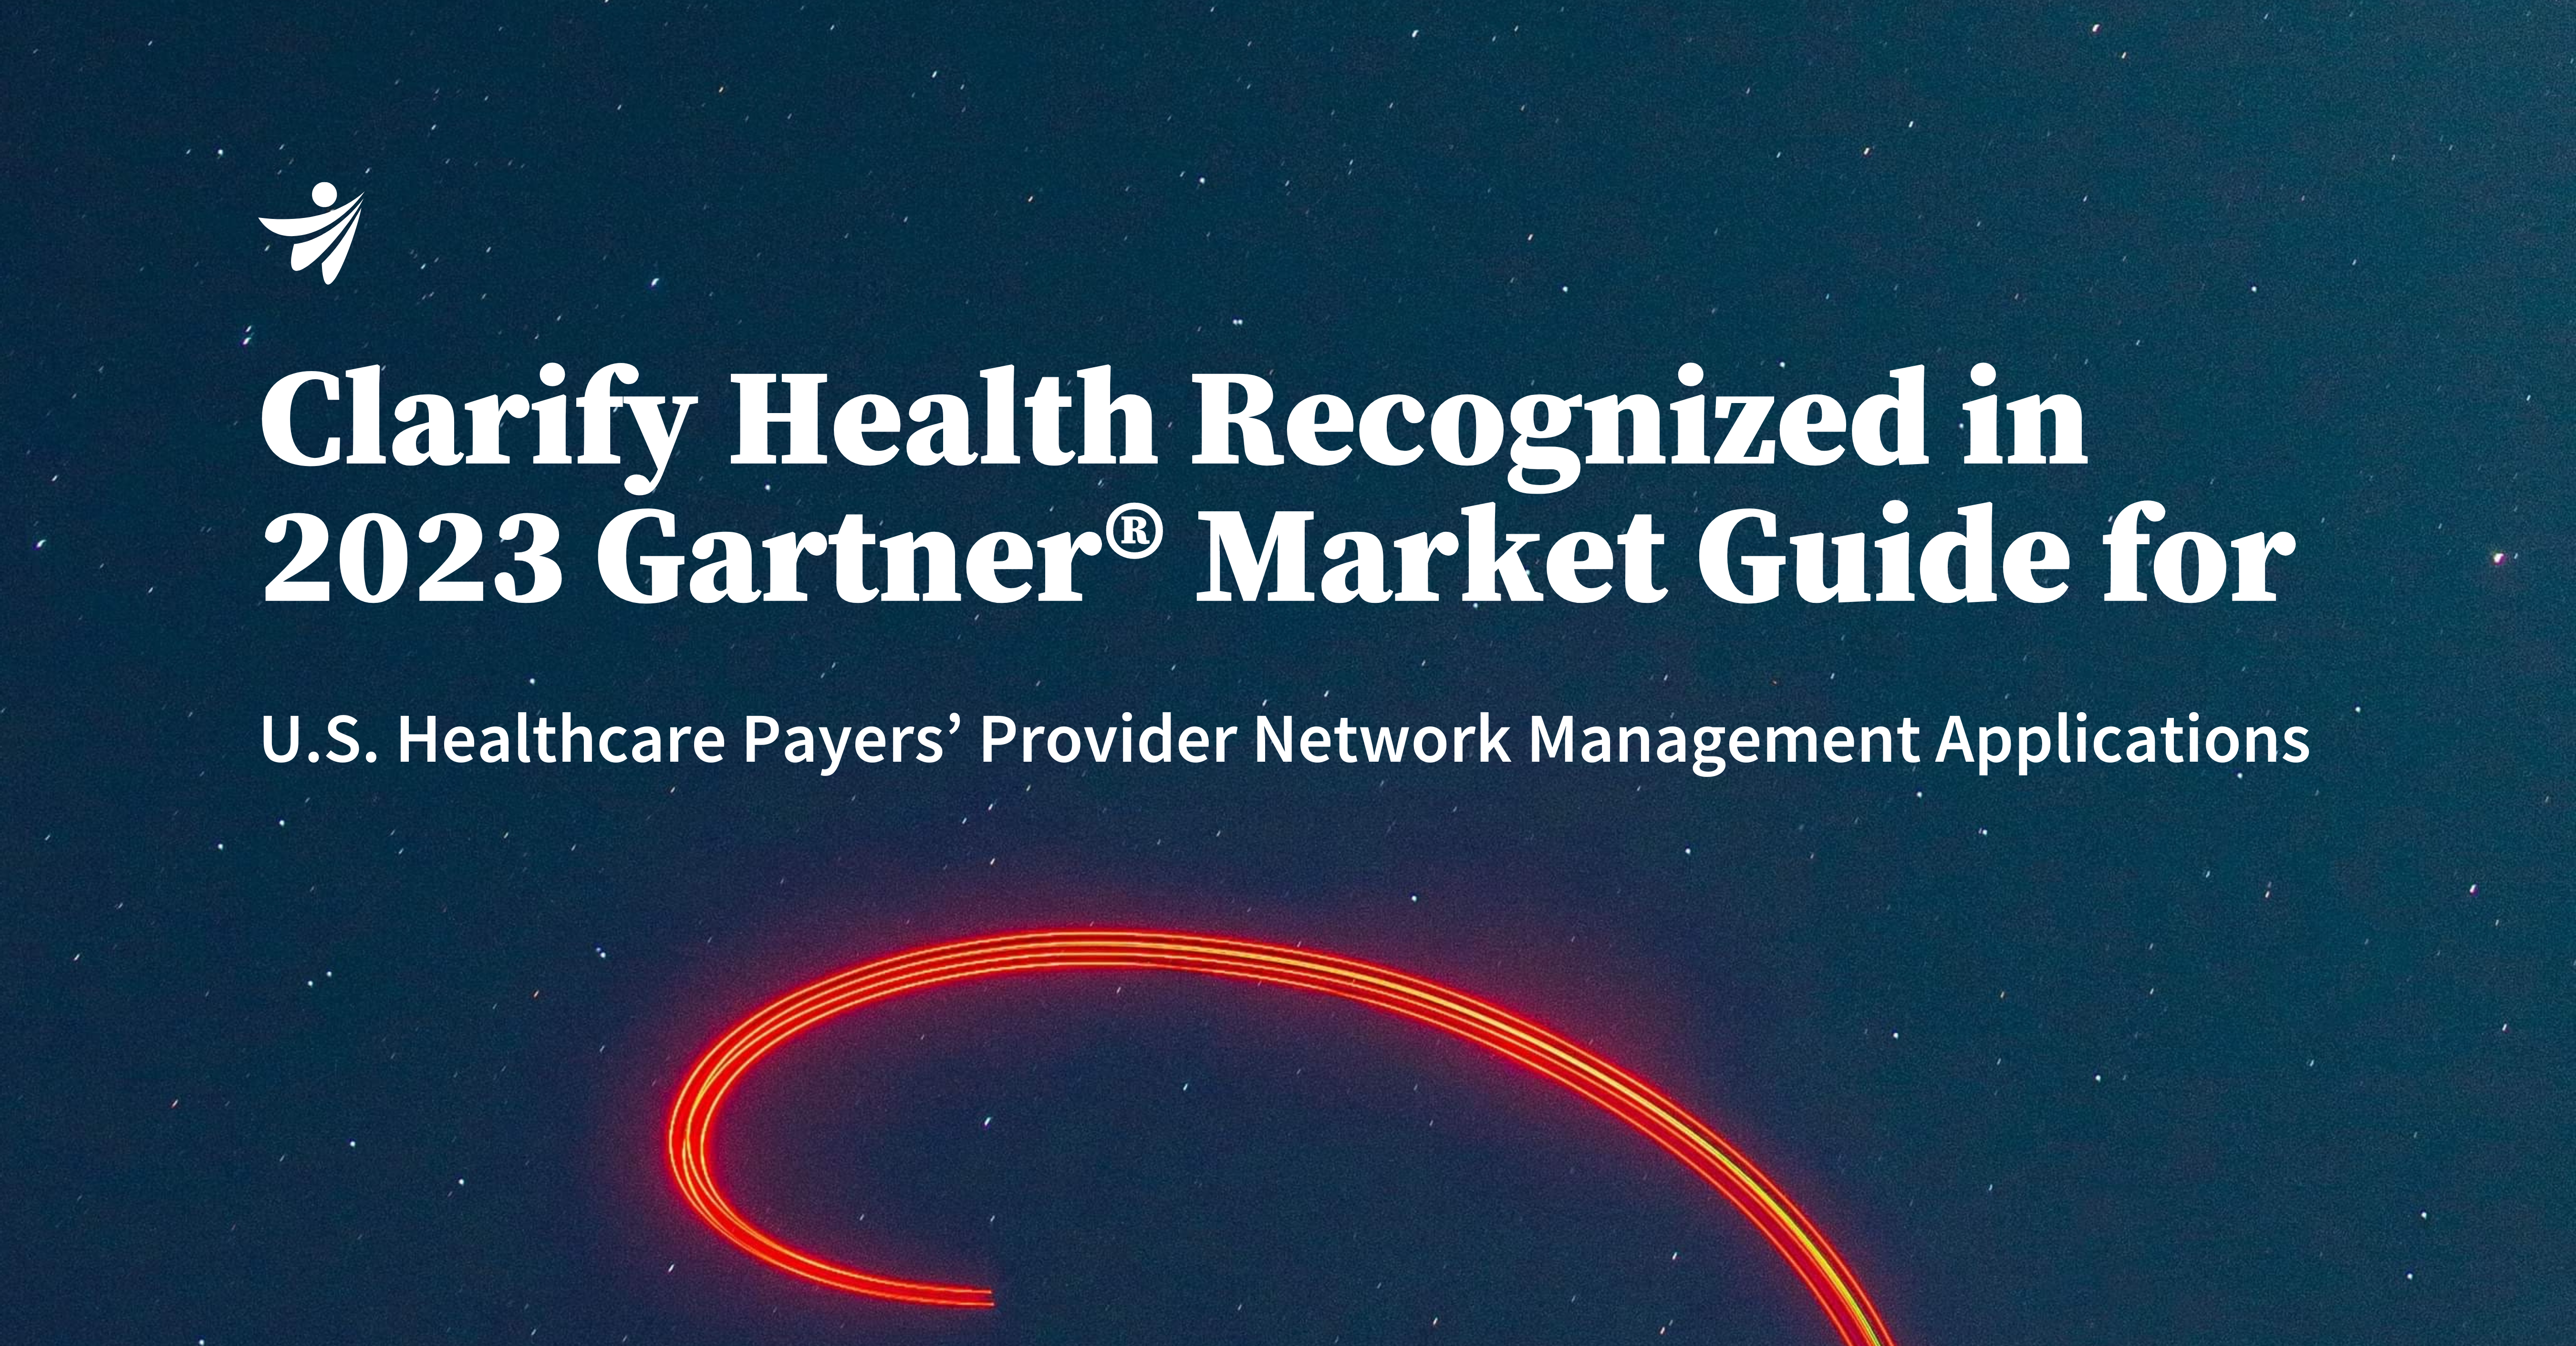 Thumbnail for Clarify Health Recognized in 2023 Gartner® Market Guide for U.S. Healthcare Payers’ Provider